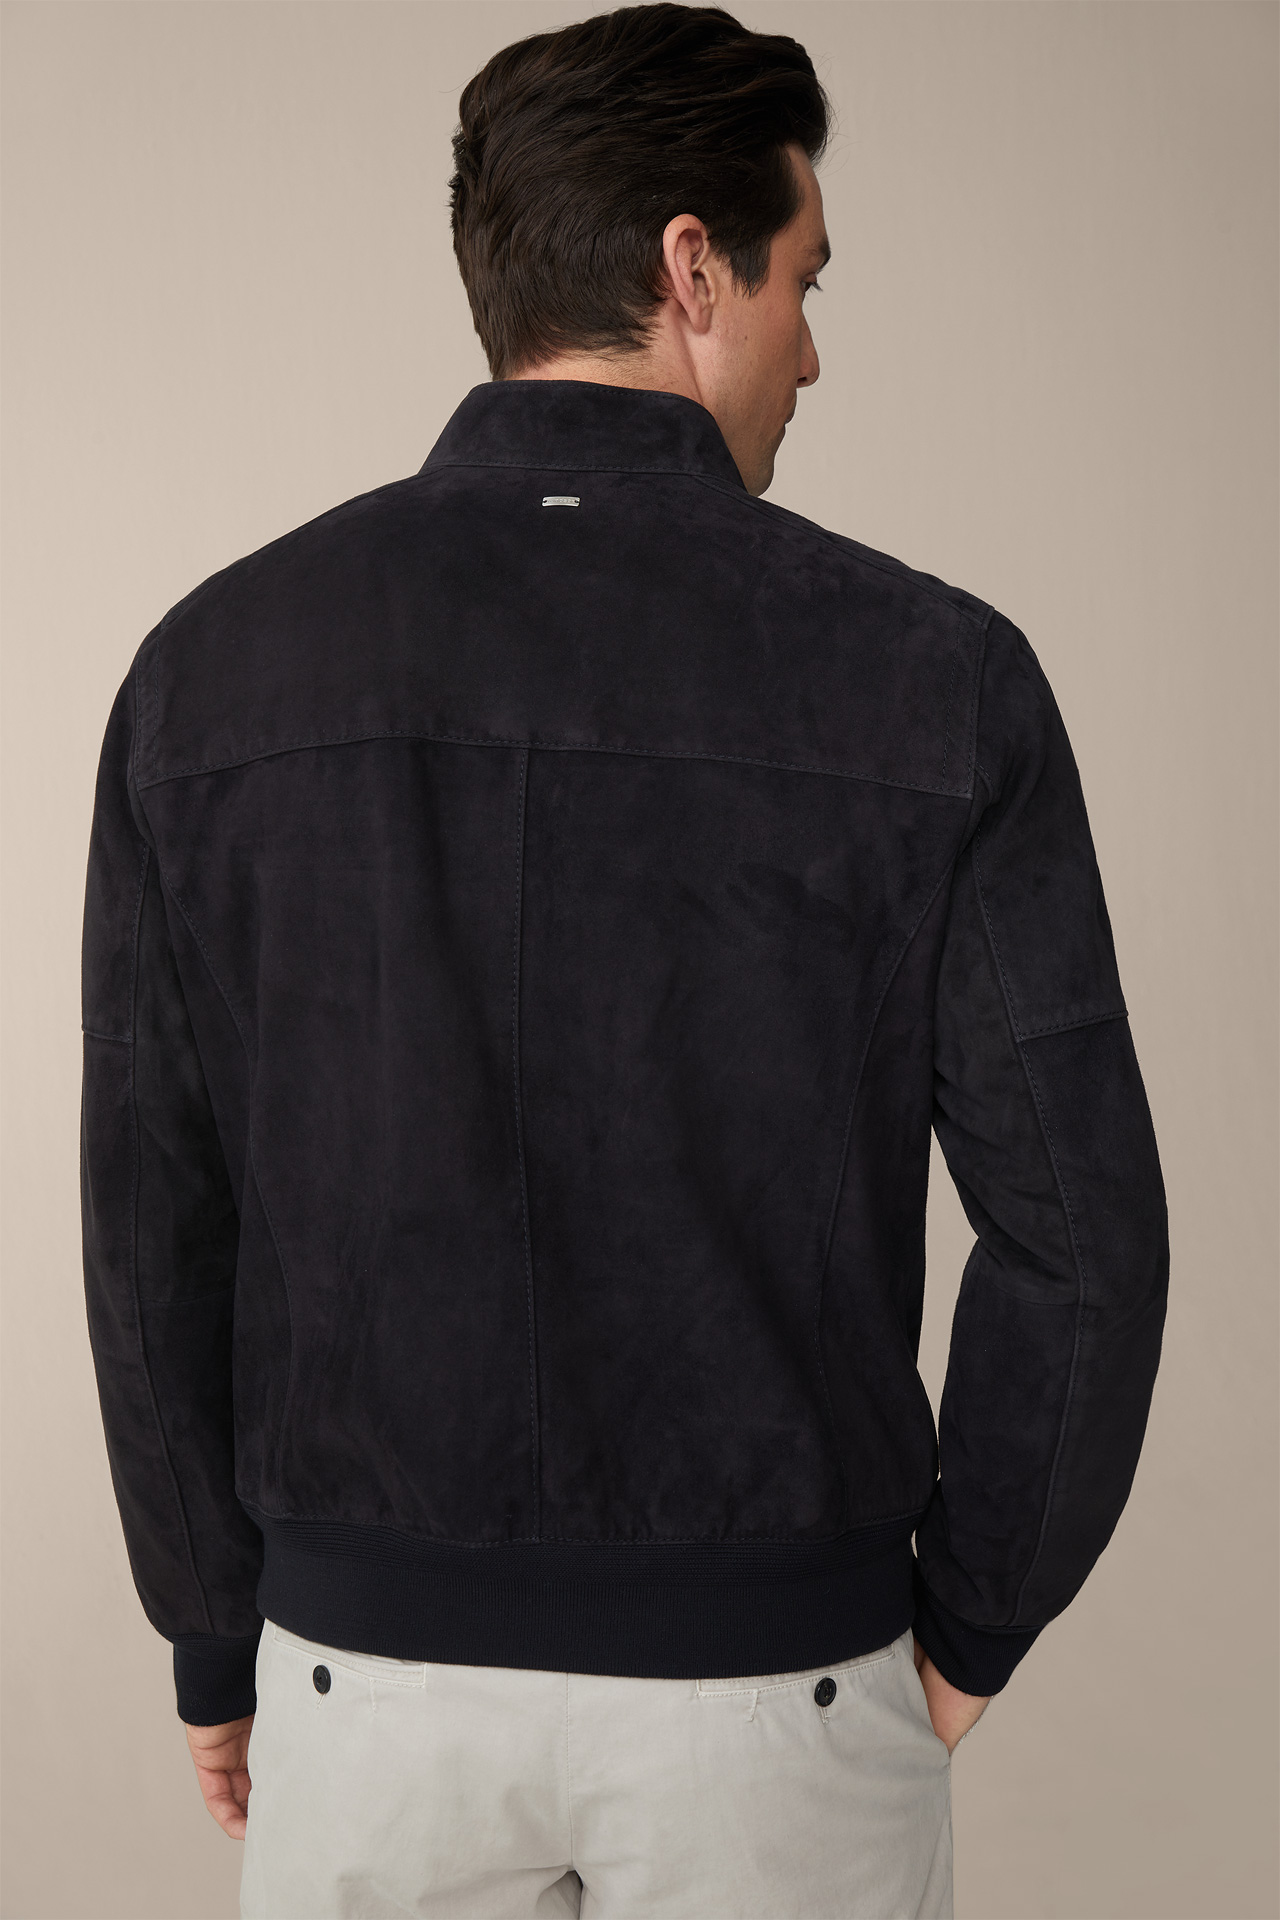 Borello Goatskin Suede Leather Bomber Jacket in Navy - in the windsor ...